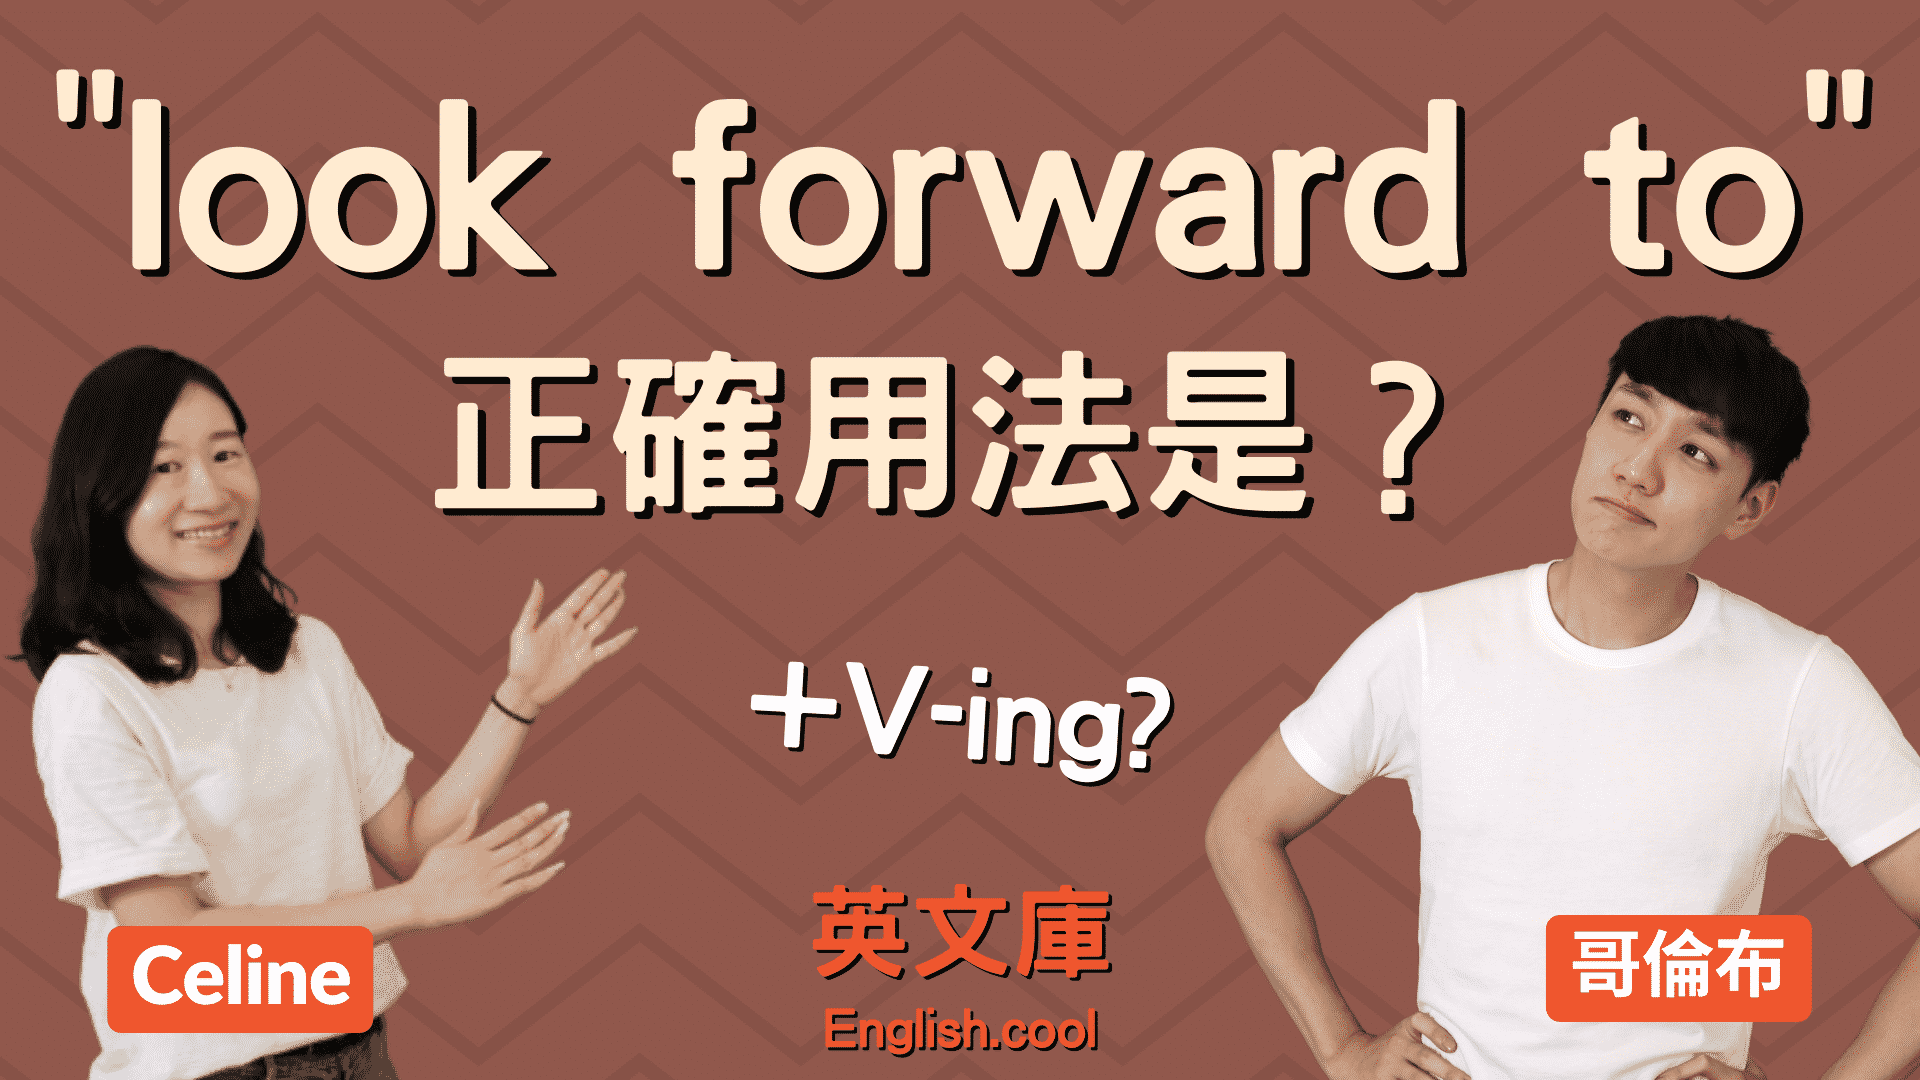 You are currently viewing 「look forward to」用法是？加 V-ing？